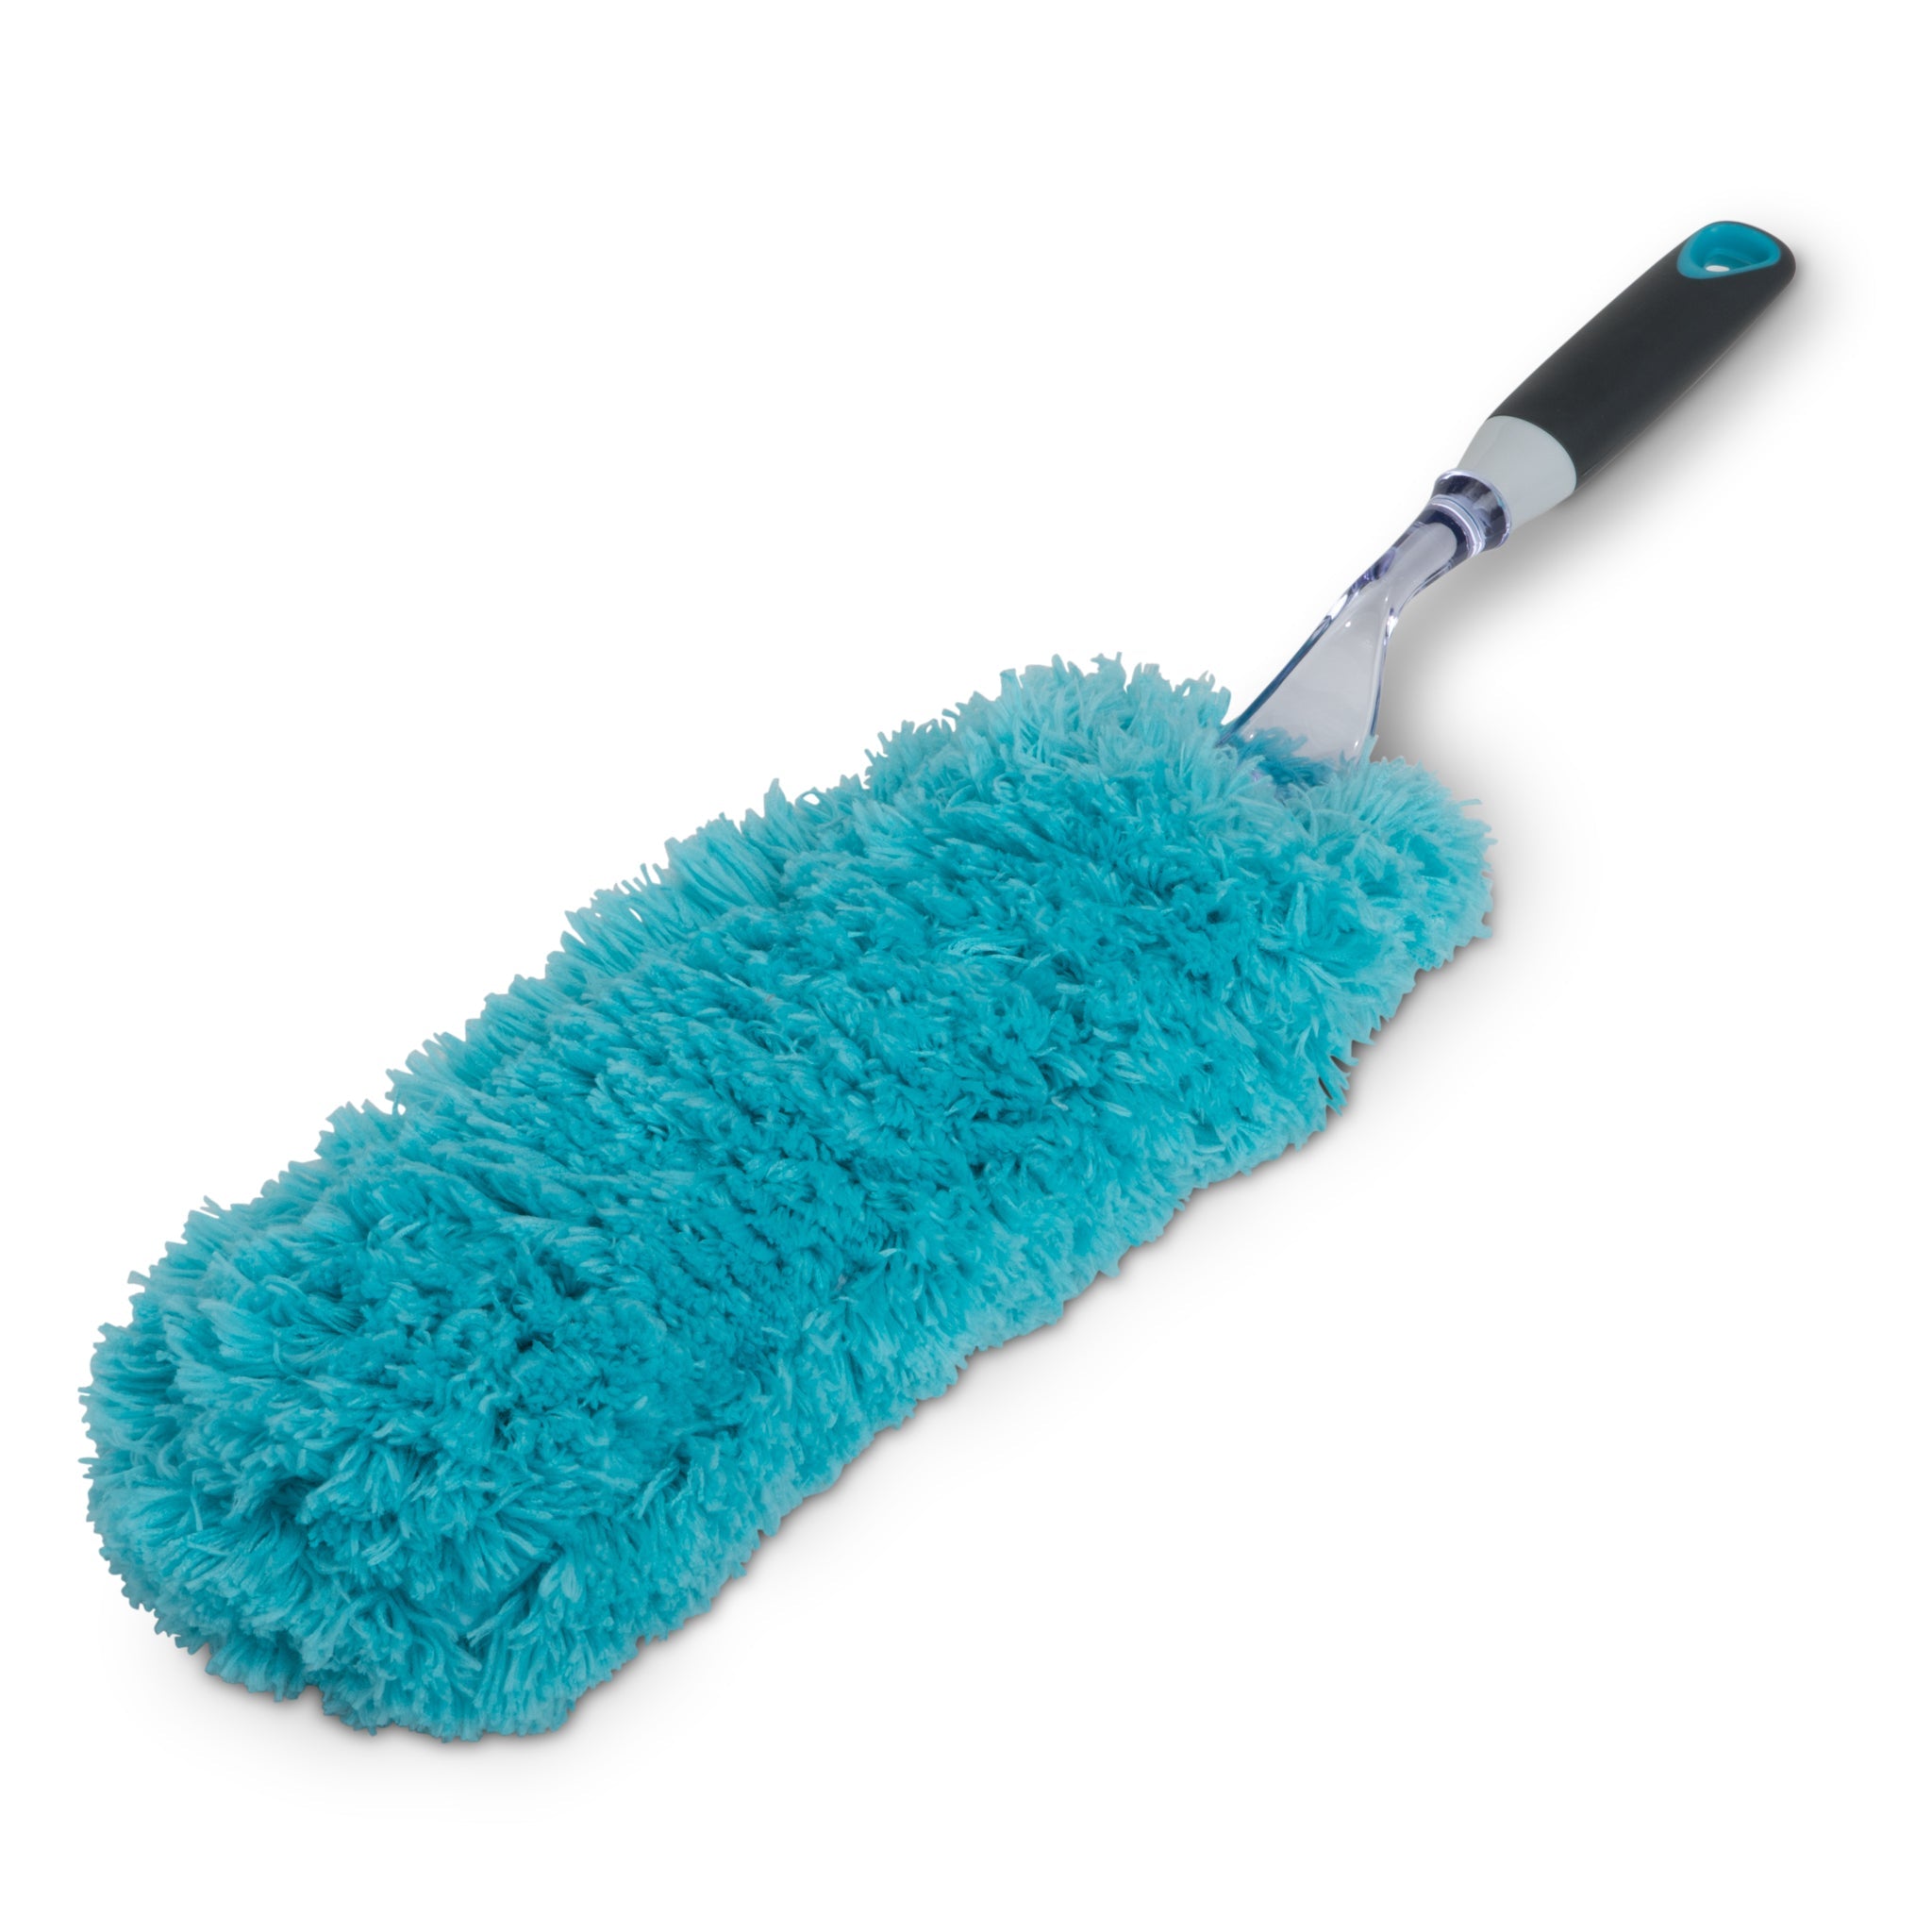 https://cdn.shopify.com/s/files/1/2393/7799/products/flat-under-appliance-microfiber-hand-duster-19-inch-smart-design-cleaning-7002158-incrementing-number-613223.jpg?v=1679342561